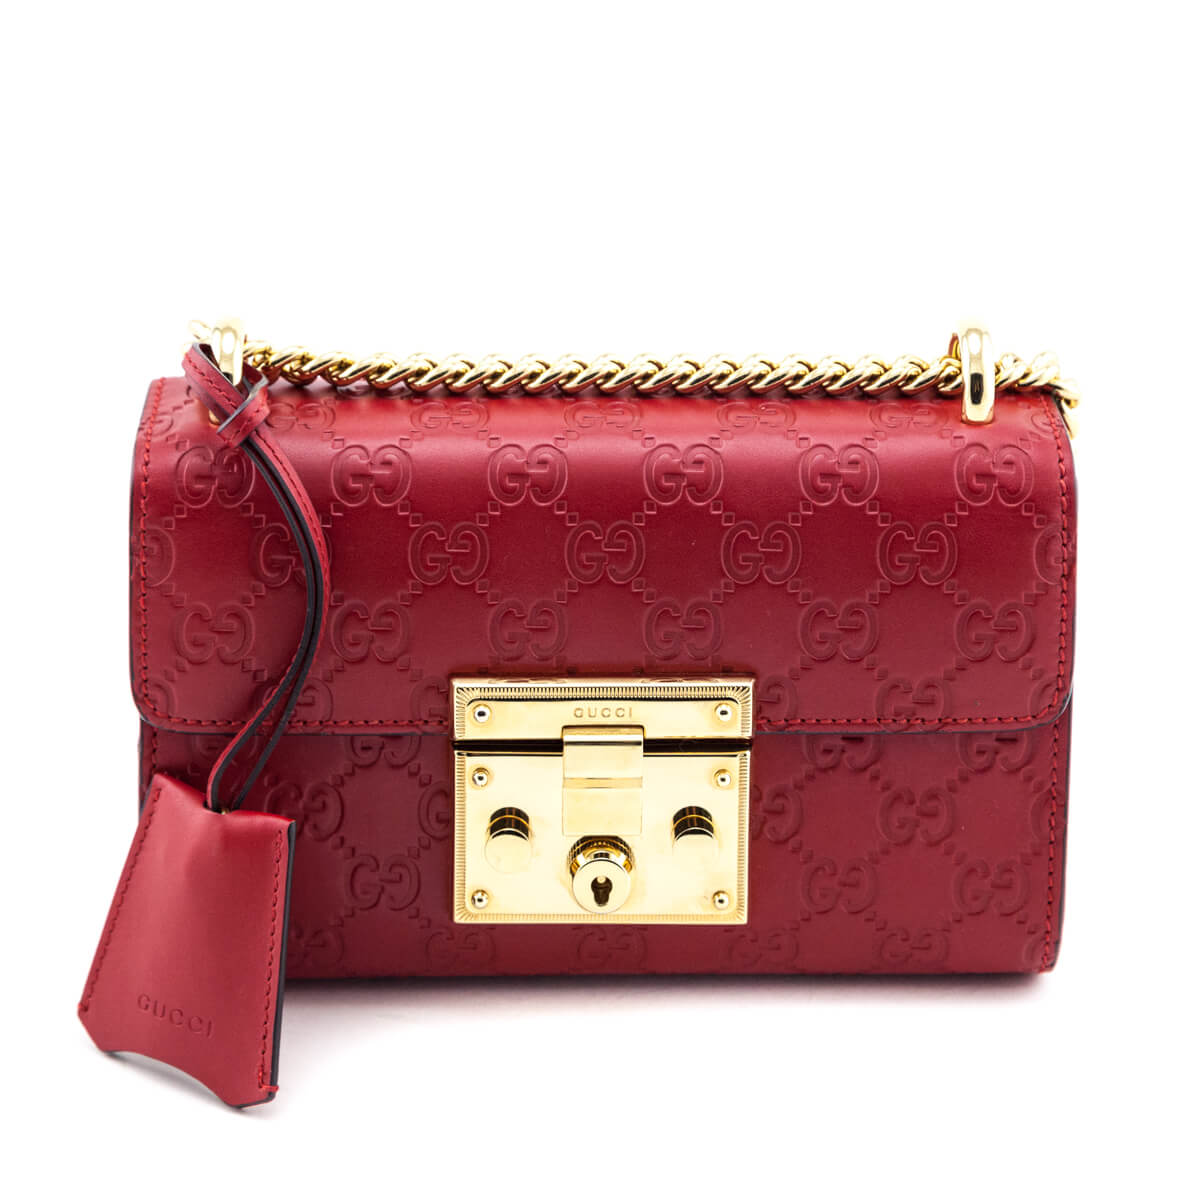 Gucci Red Guccissima Small PadLock Shoulder Bag - Love that Bag etc - Preowned Authentic Designer Handbags & Preloved Fashions